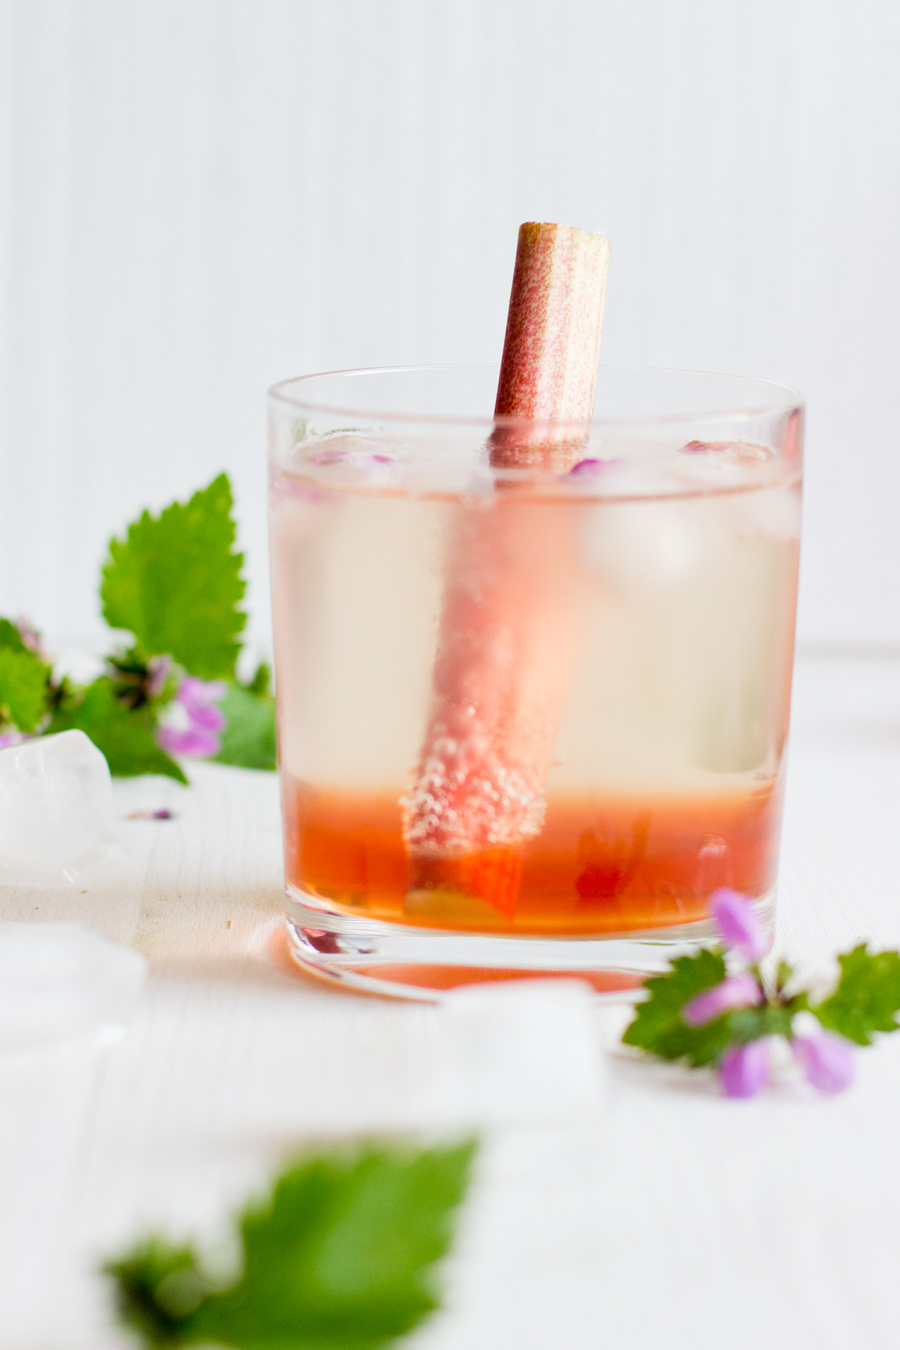 Rhubarb gin fizz cocktail recipe | Enjoy this cool and refreshing  cocktail on hot summer nights. Made in 5 mins and definitely a crowd-pleaser